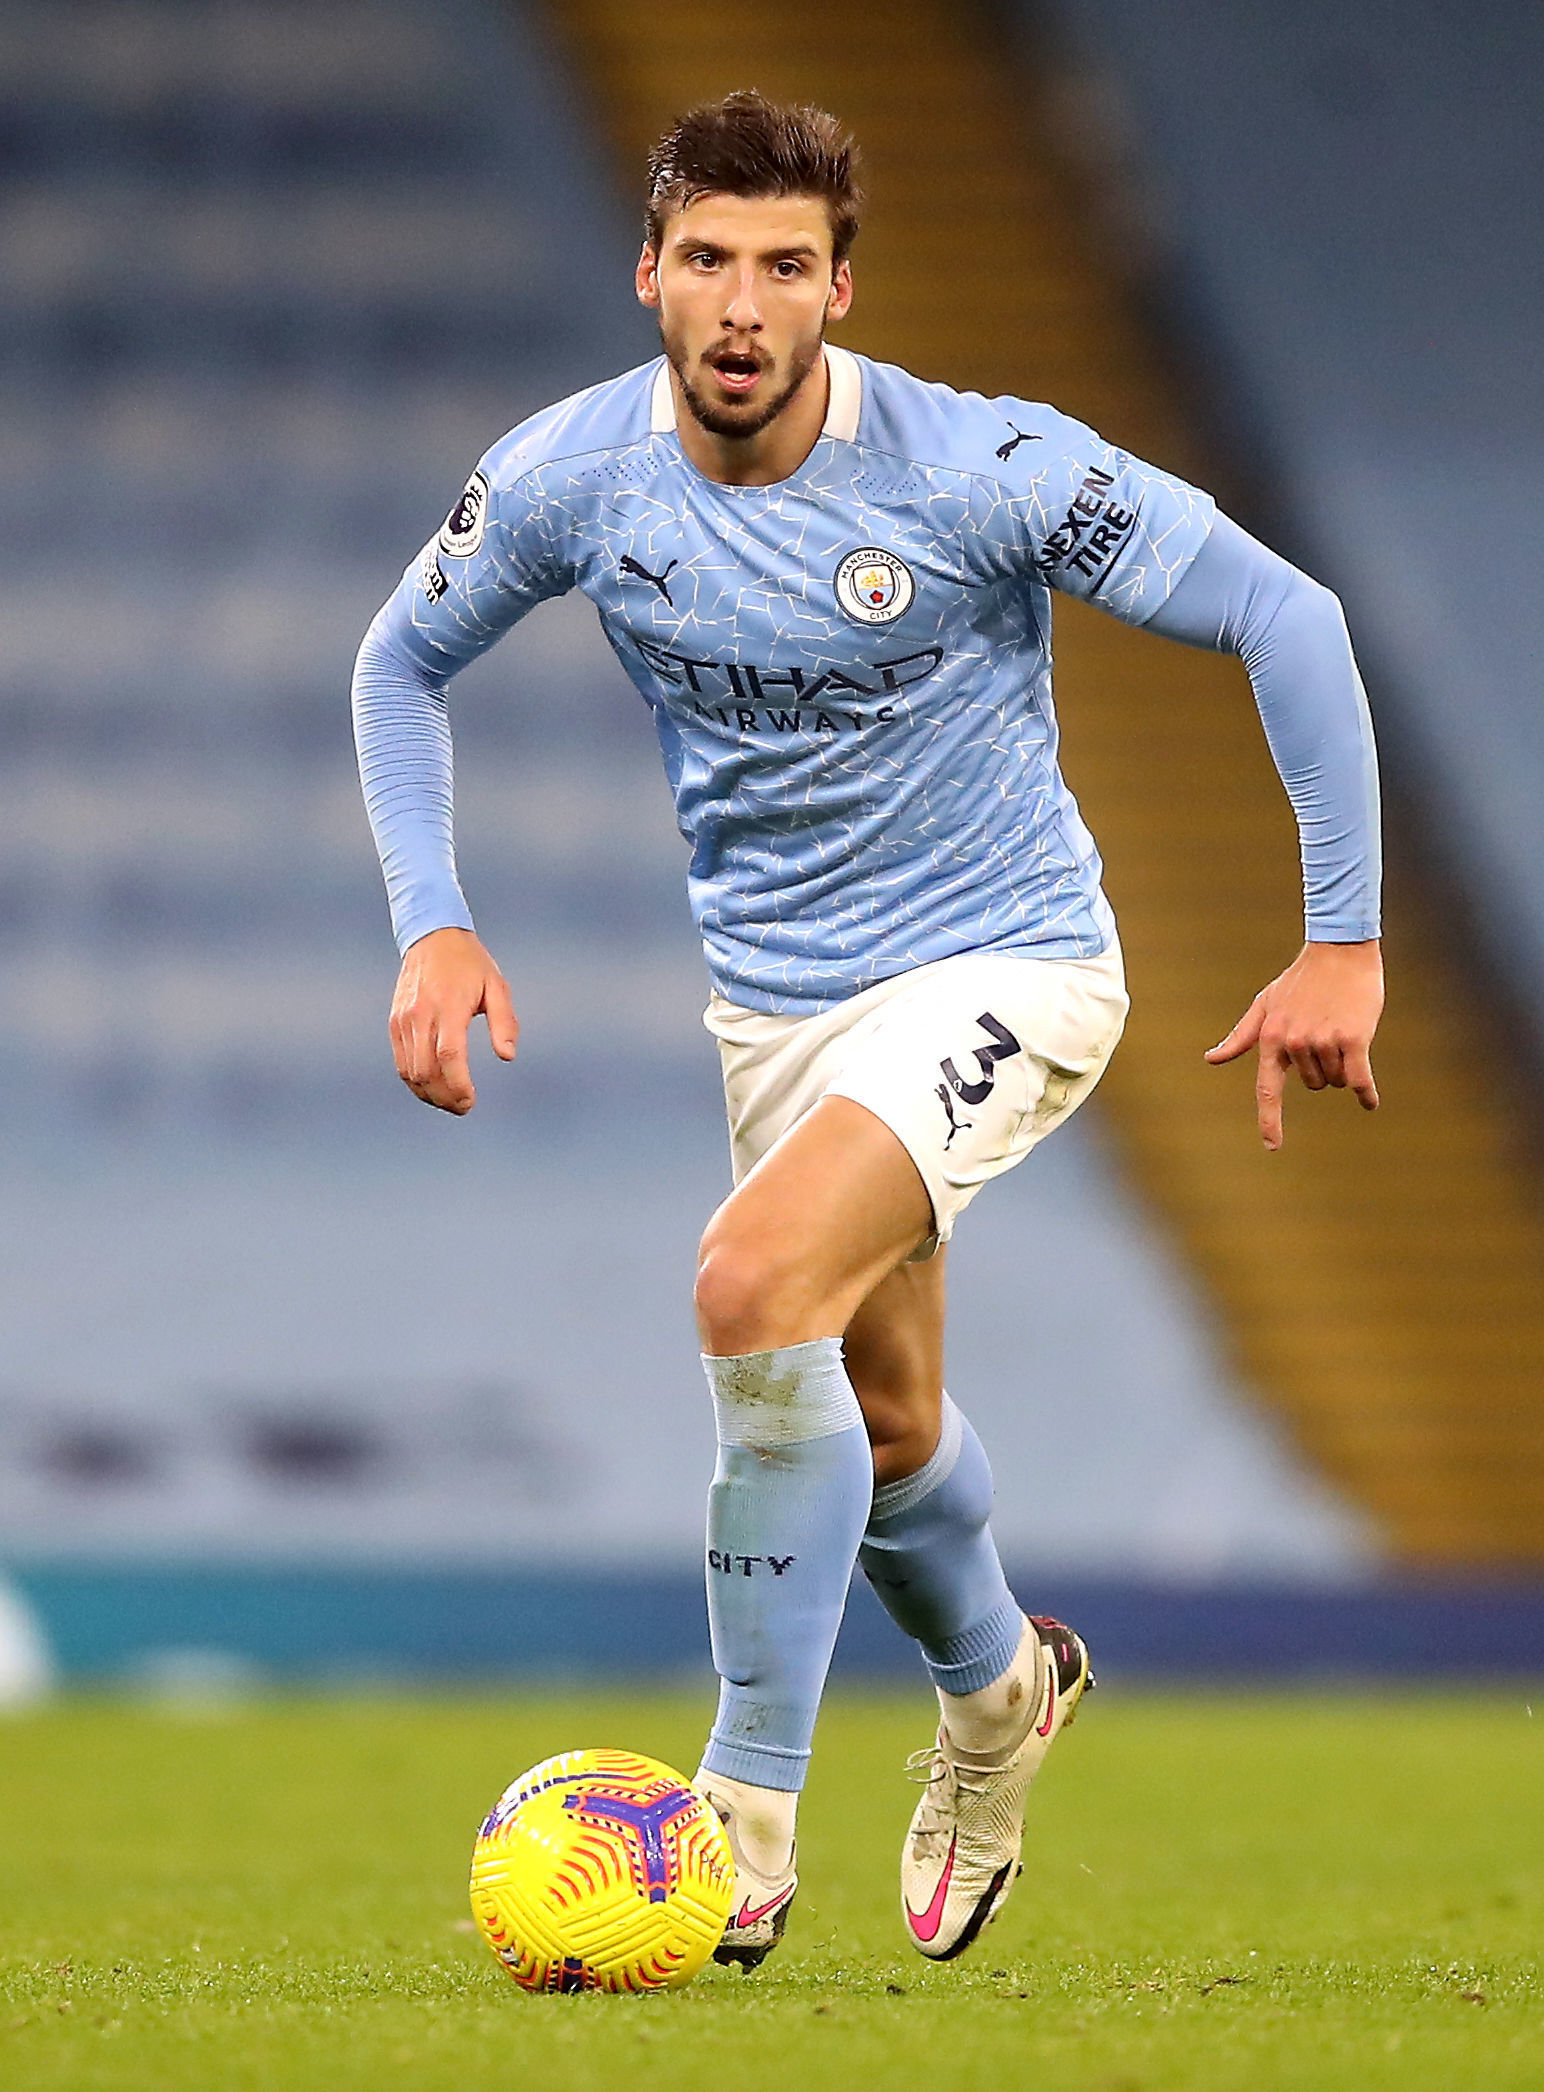 File photo dated 11-05-2021 of Manchester Citys Ruben Dias. Issue date: Wednesday May 26, 2021. PA Photo. Man City chase elusive Euro title as Chelsea aim to crown revival under Tuchel. City are strong from back to front, with the arrival of Ruben Dias